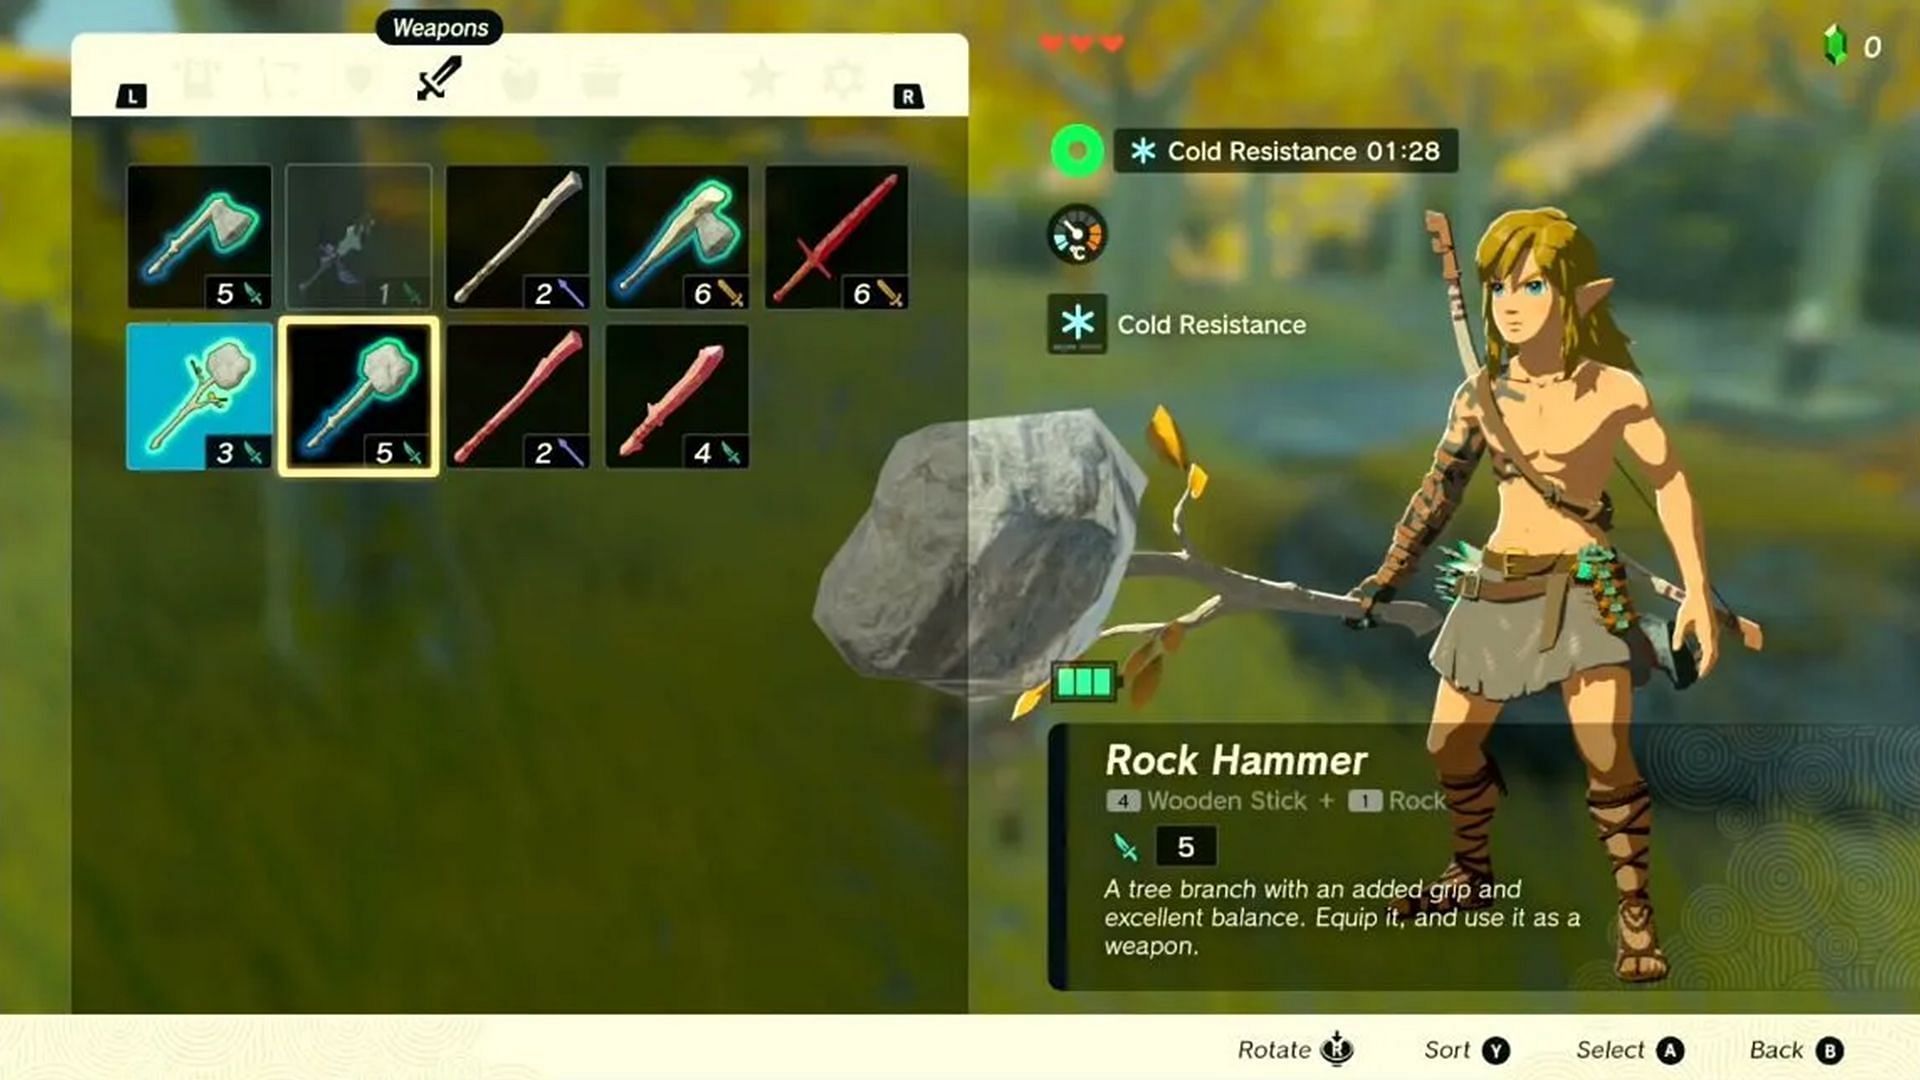 The Rock Hammer as seen in the game (Image via Nintendo)